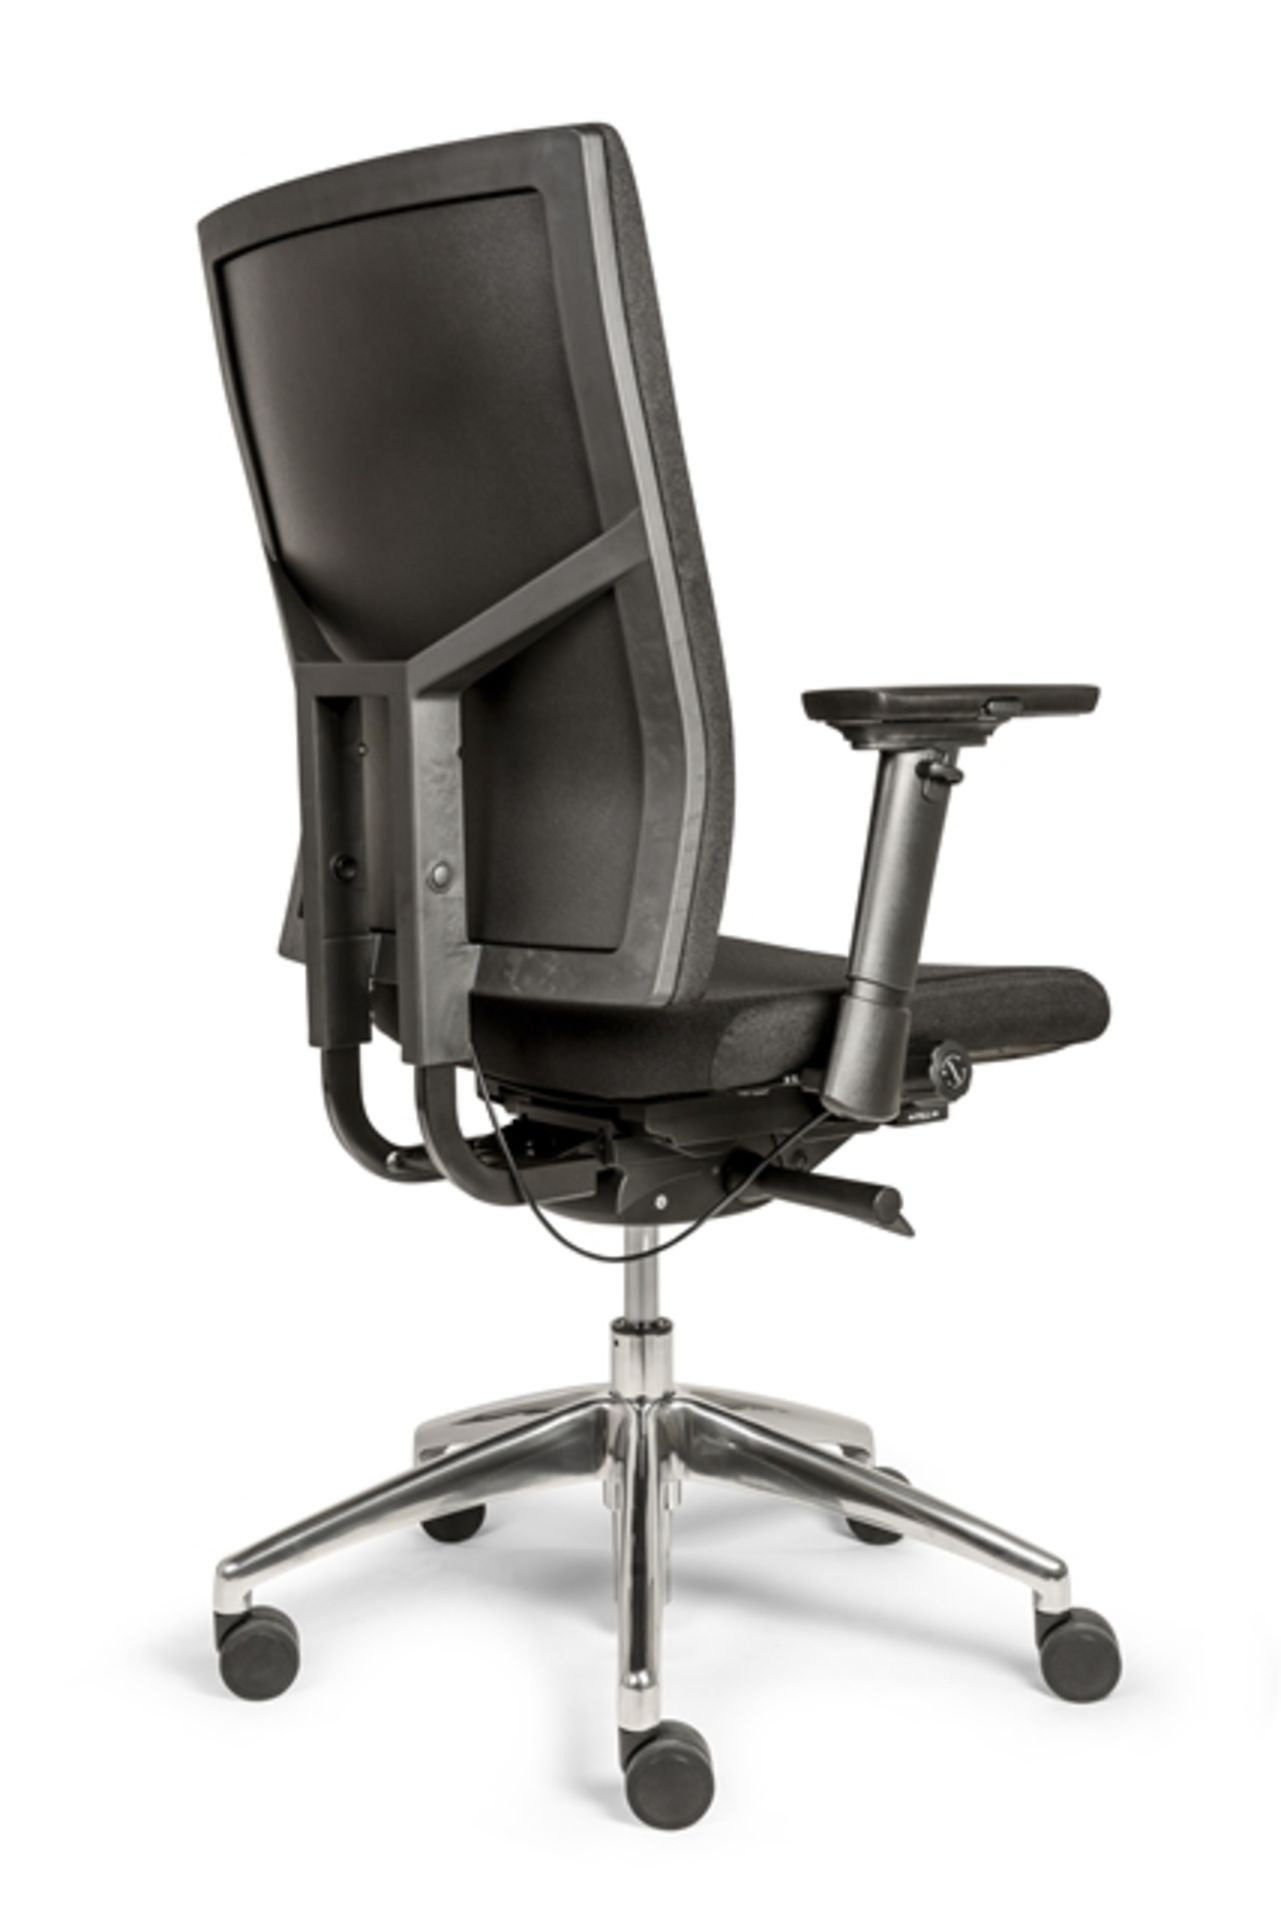 Unused ergonomic fully upholstered office chair in black (RRP £289) located in Stafford, viewing - Image 6 of 7